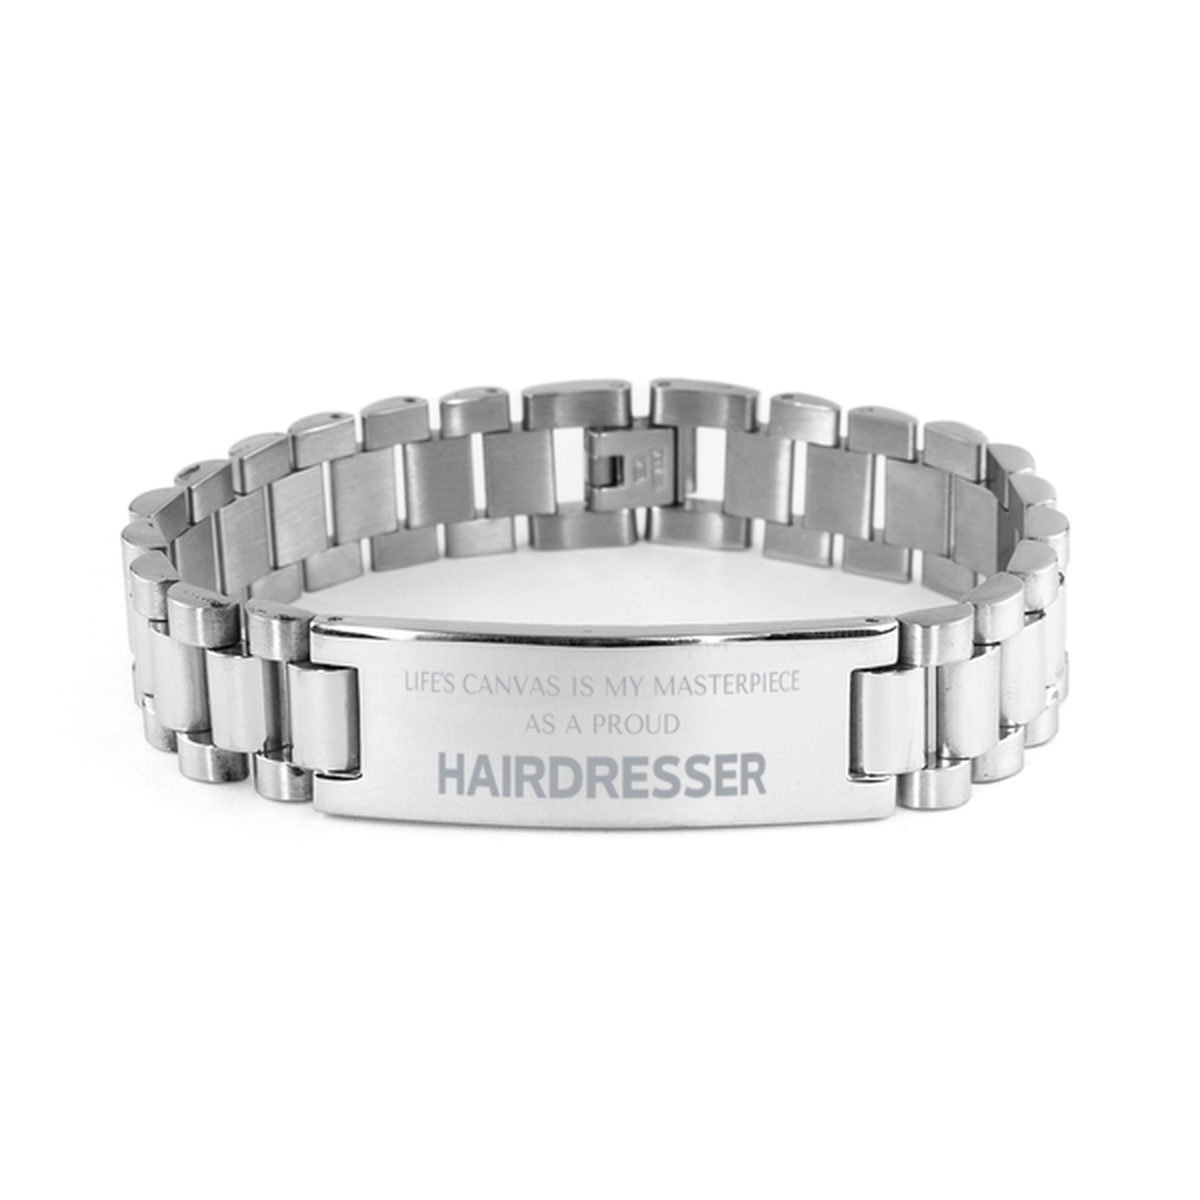 Proud Hairdresser Gifts, Life's canvas is my masterpiece, Epic Birthday Christmas Unique Ladder Stainless Steel Bracelet For Hairdresser, Coworkers, Men, Women, Friends